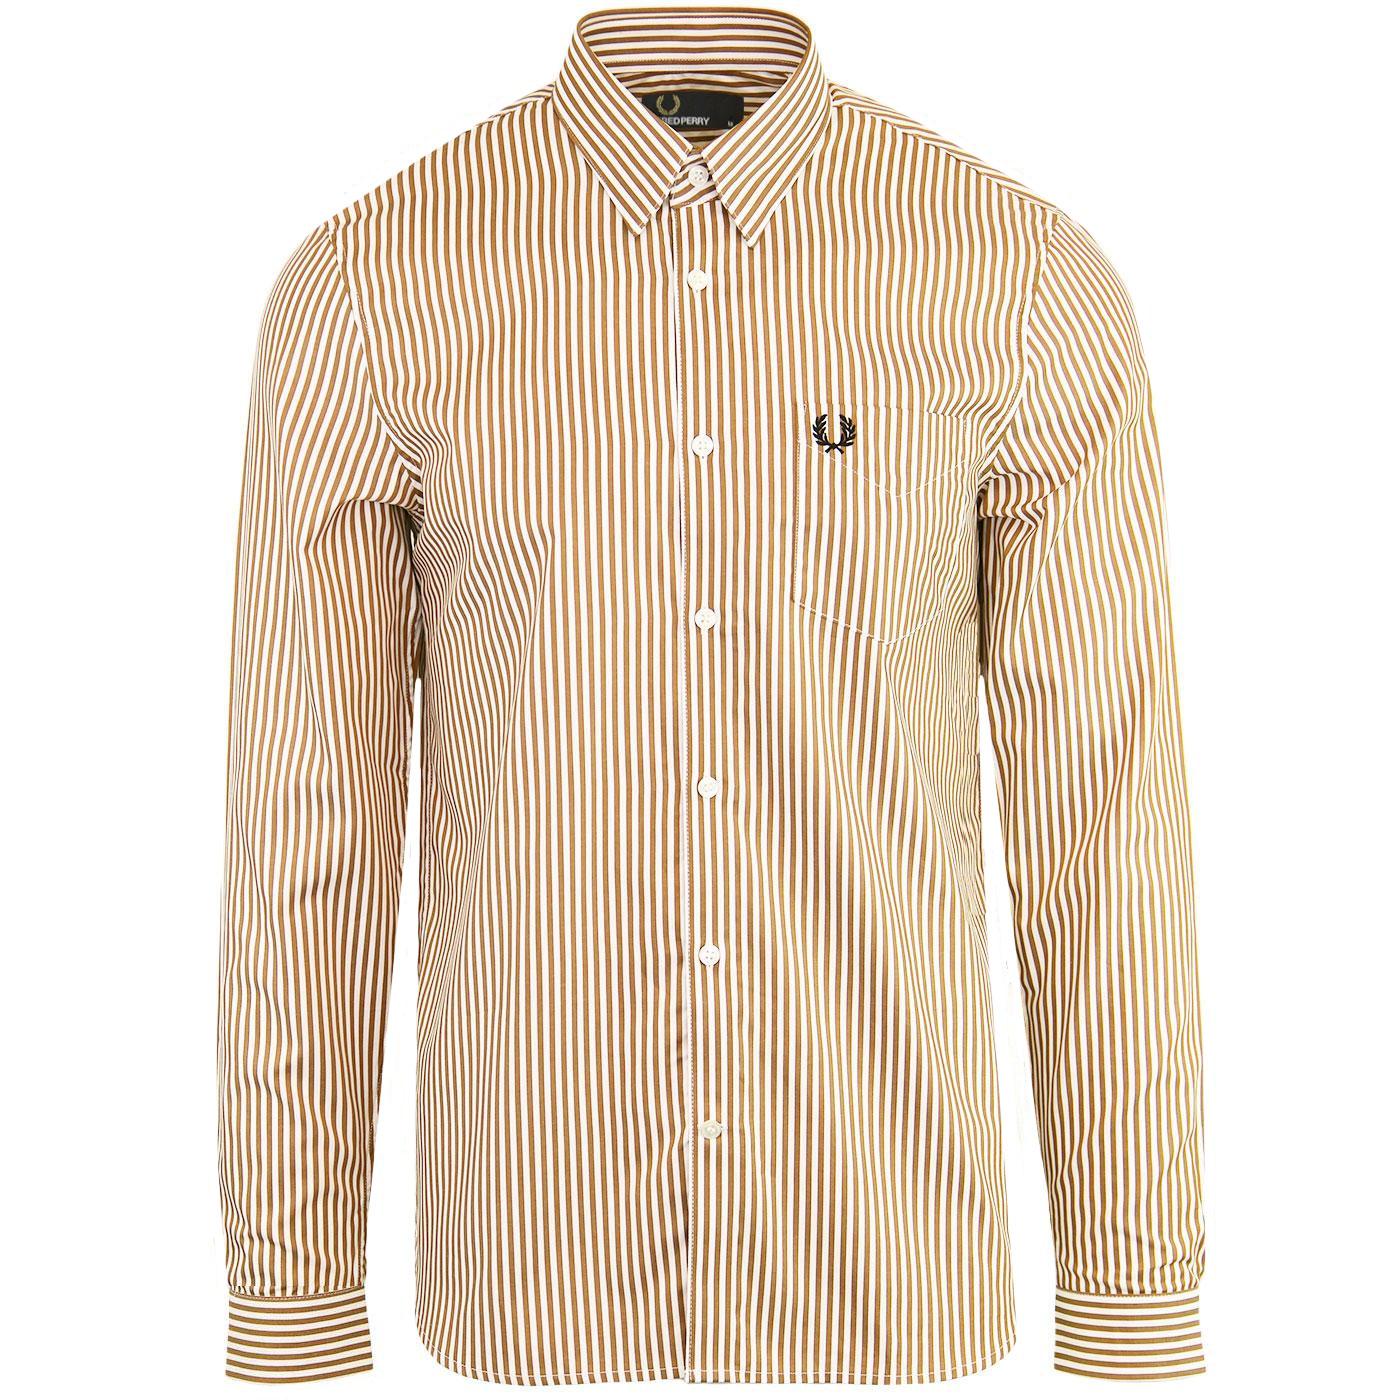 FRED PERRY Men's Retro Candy Stripe Twill Shirt C